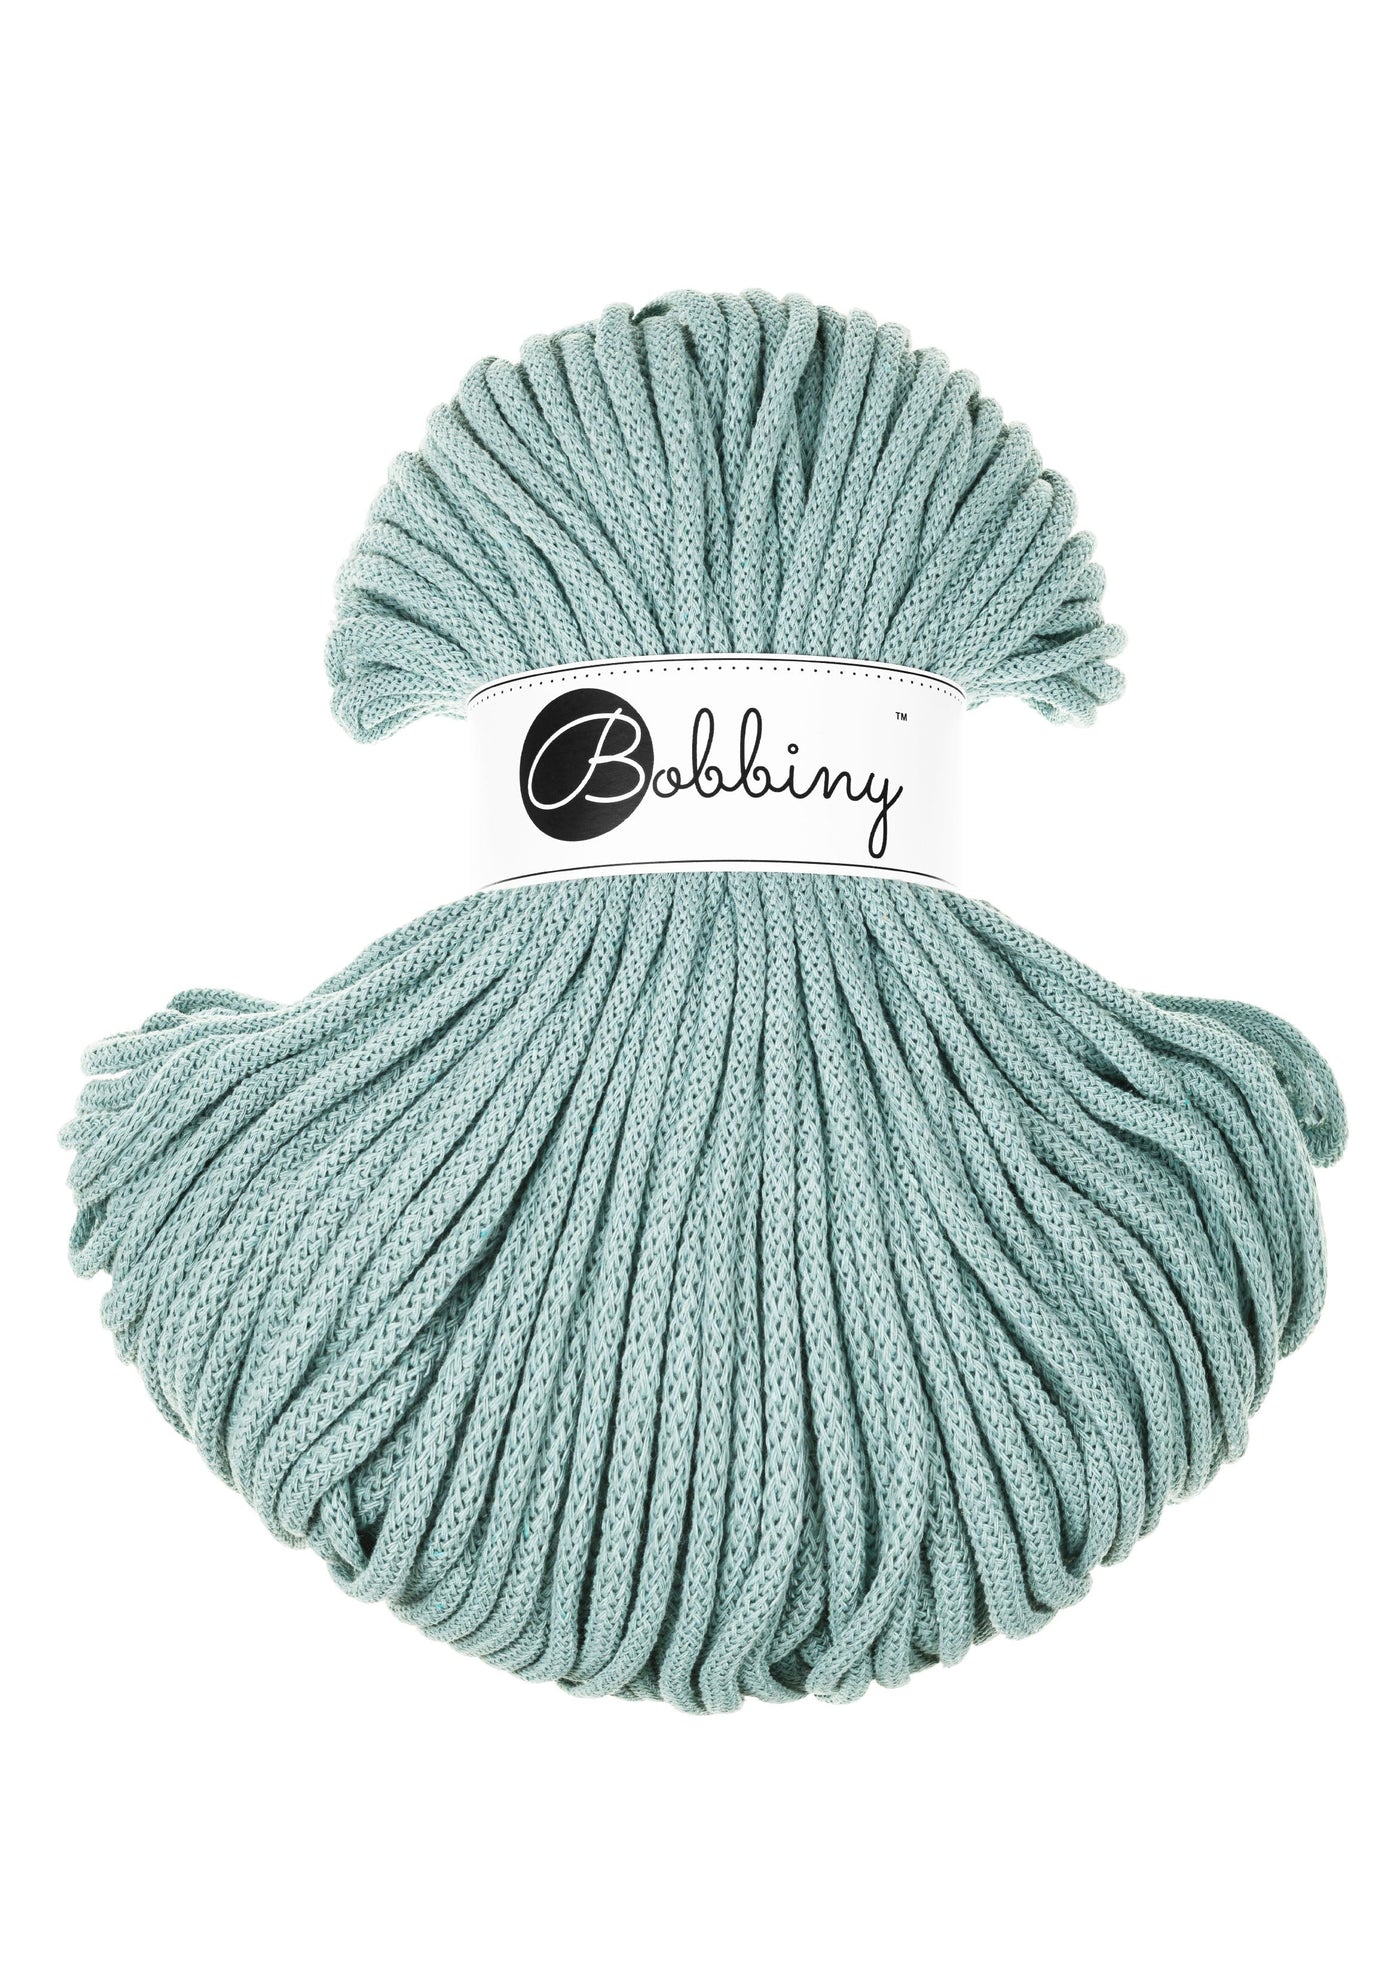 Bobbiny braided cord in 5mm width in duck egg blue shade 